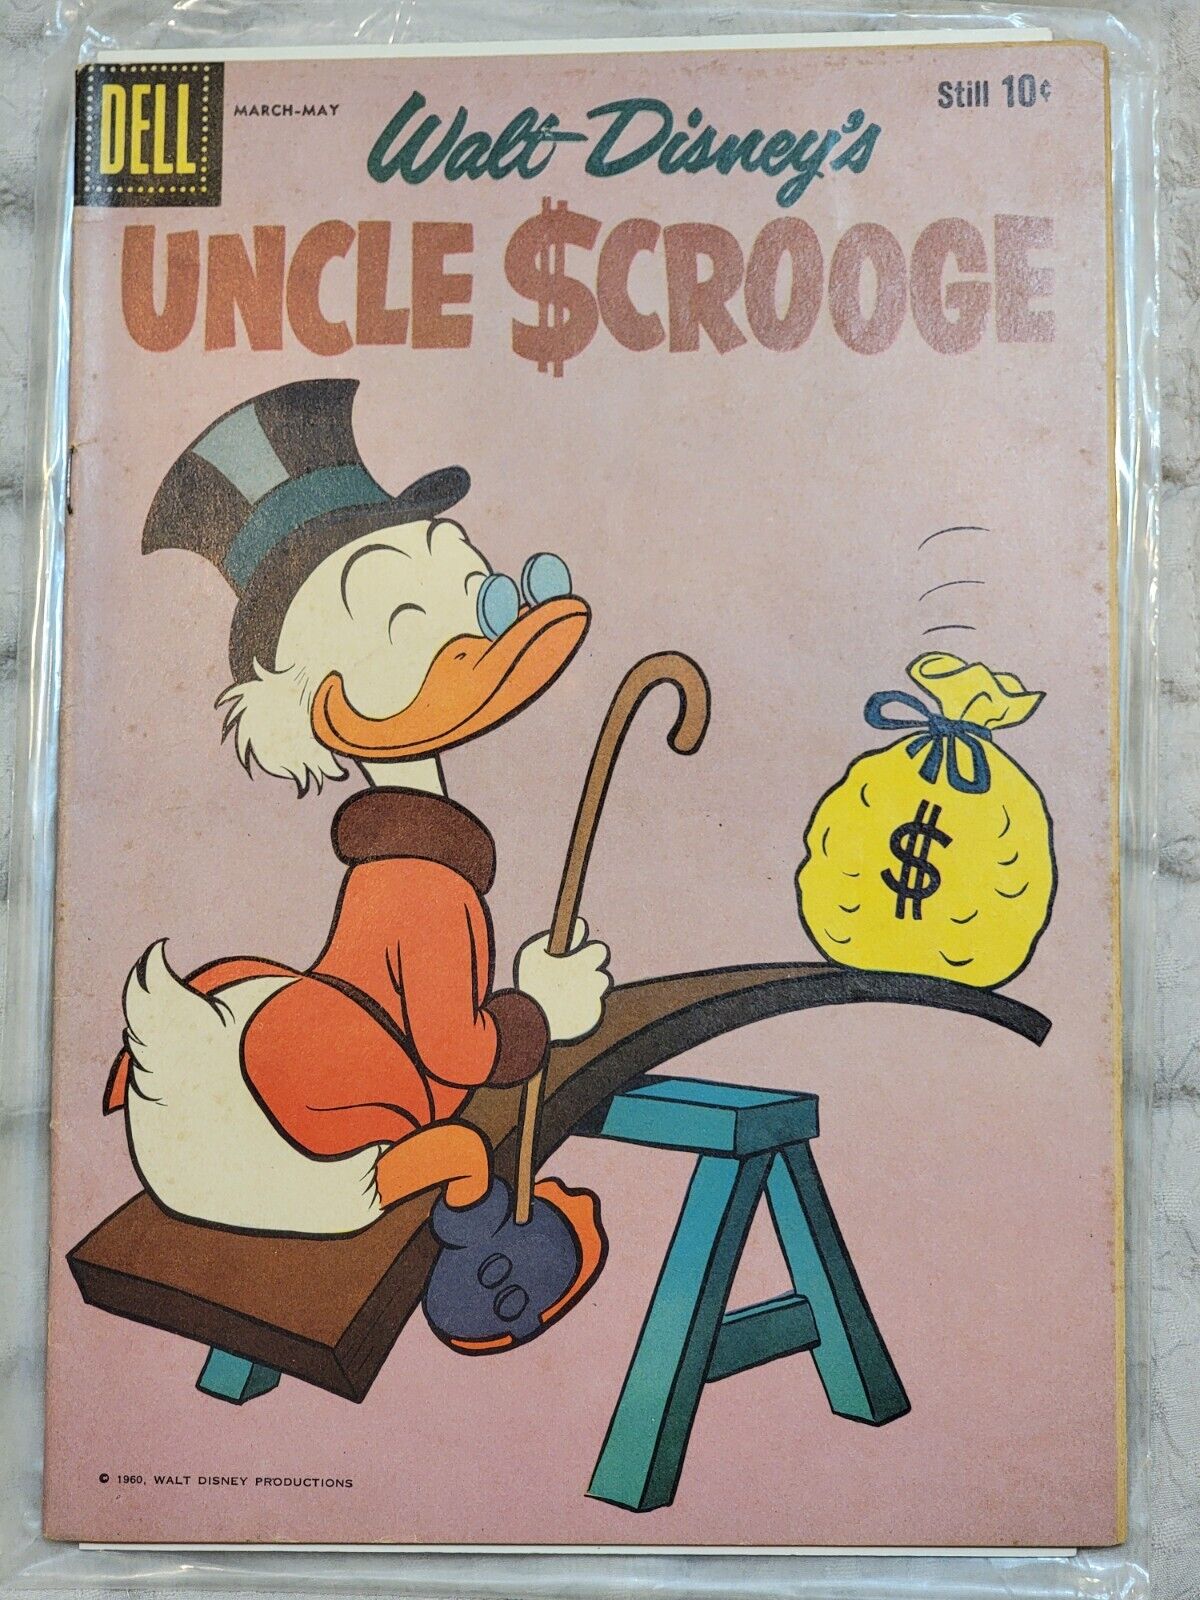 Uncle Scrooge #29: Dell Comics (1960) Comic Book, Nice Overall Condition